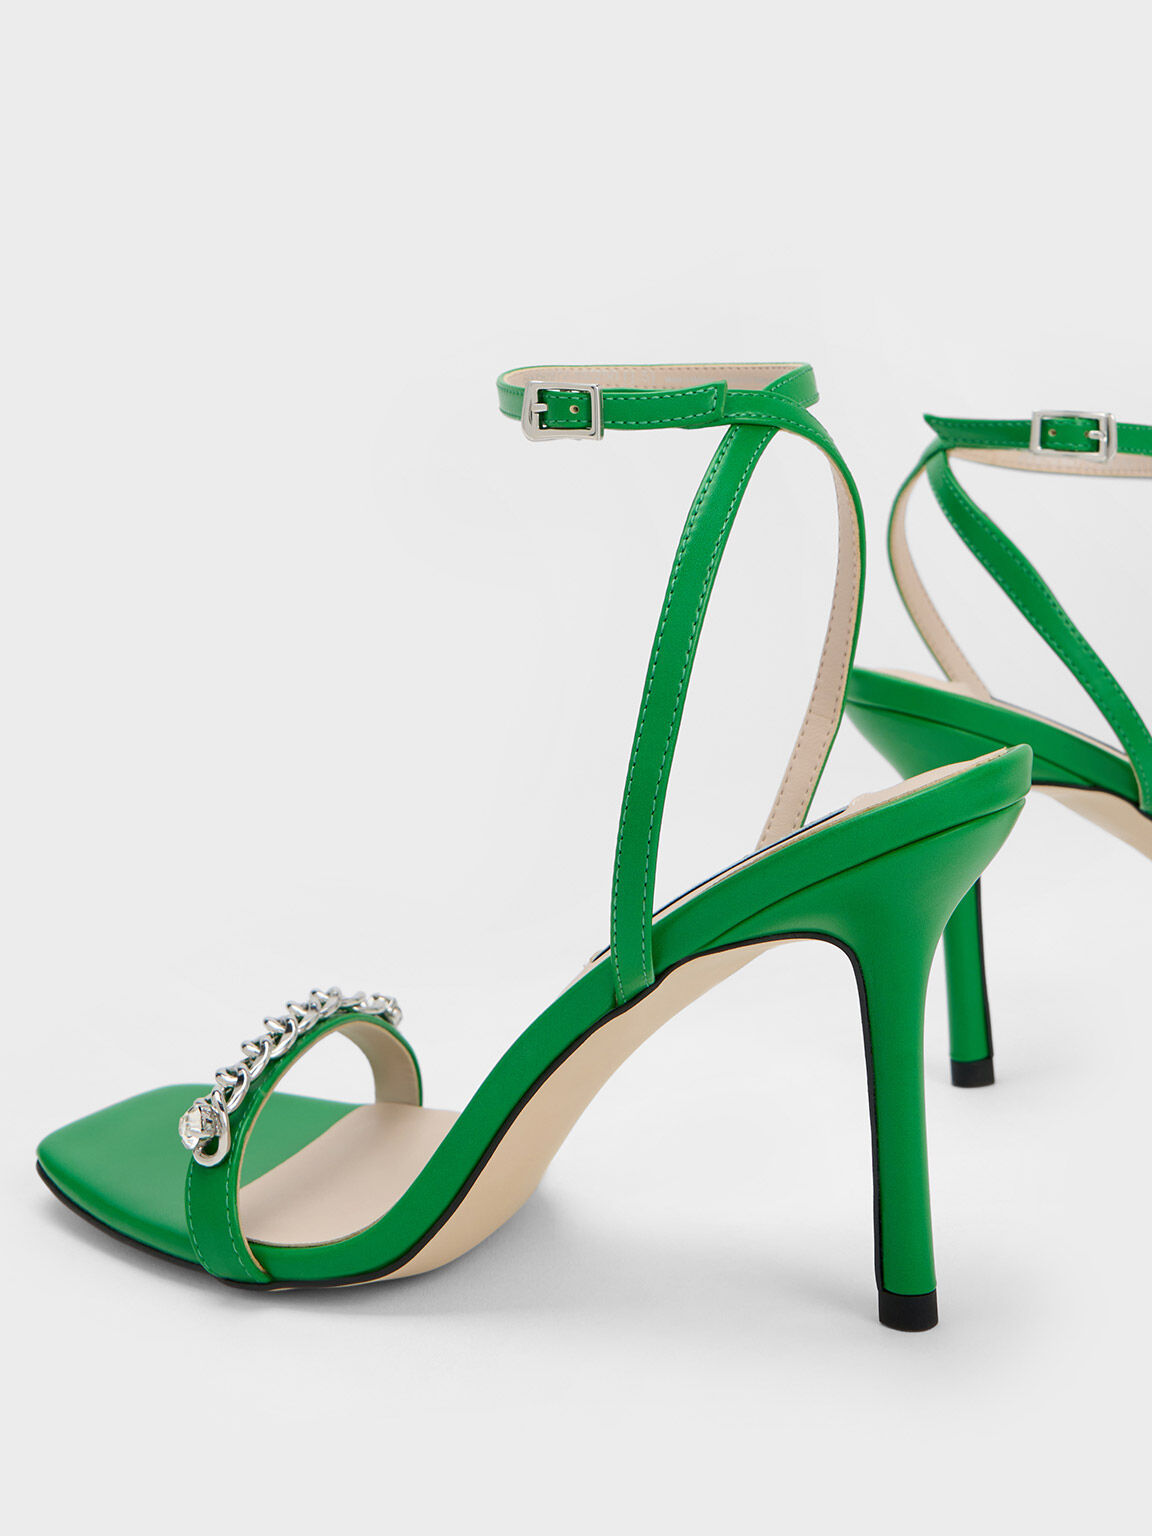 Green and Brown Peep Toe Heeled Sandals · Free Stock Photo